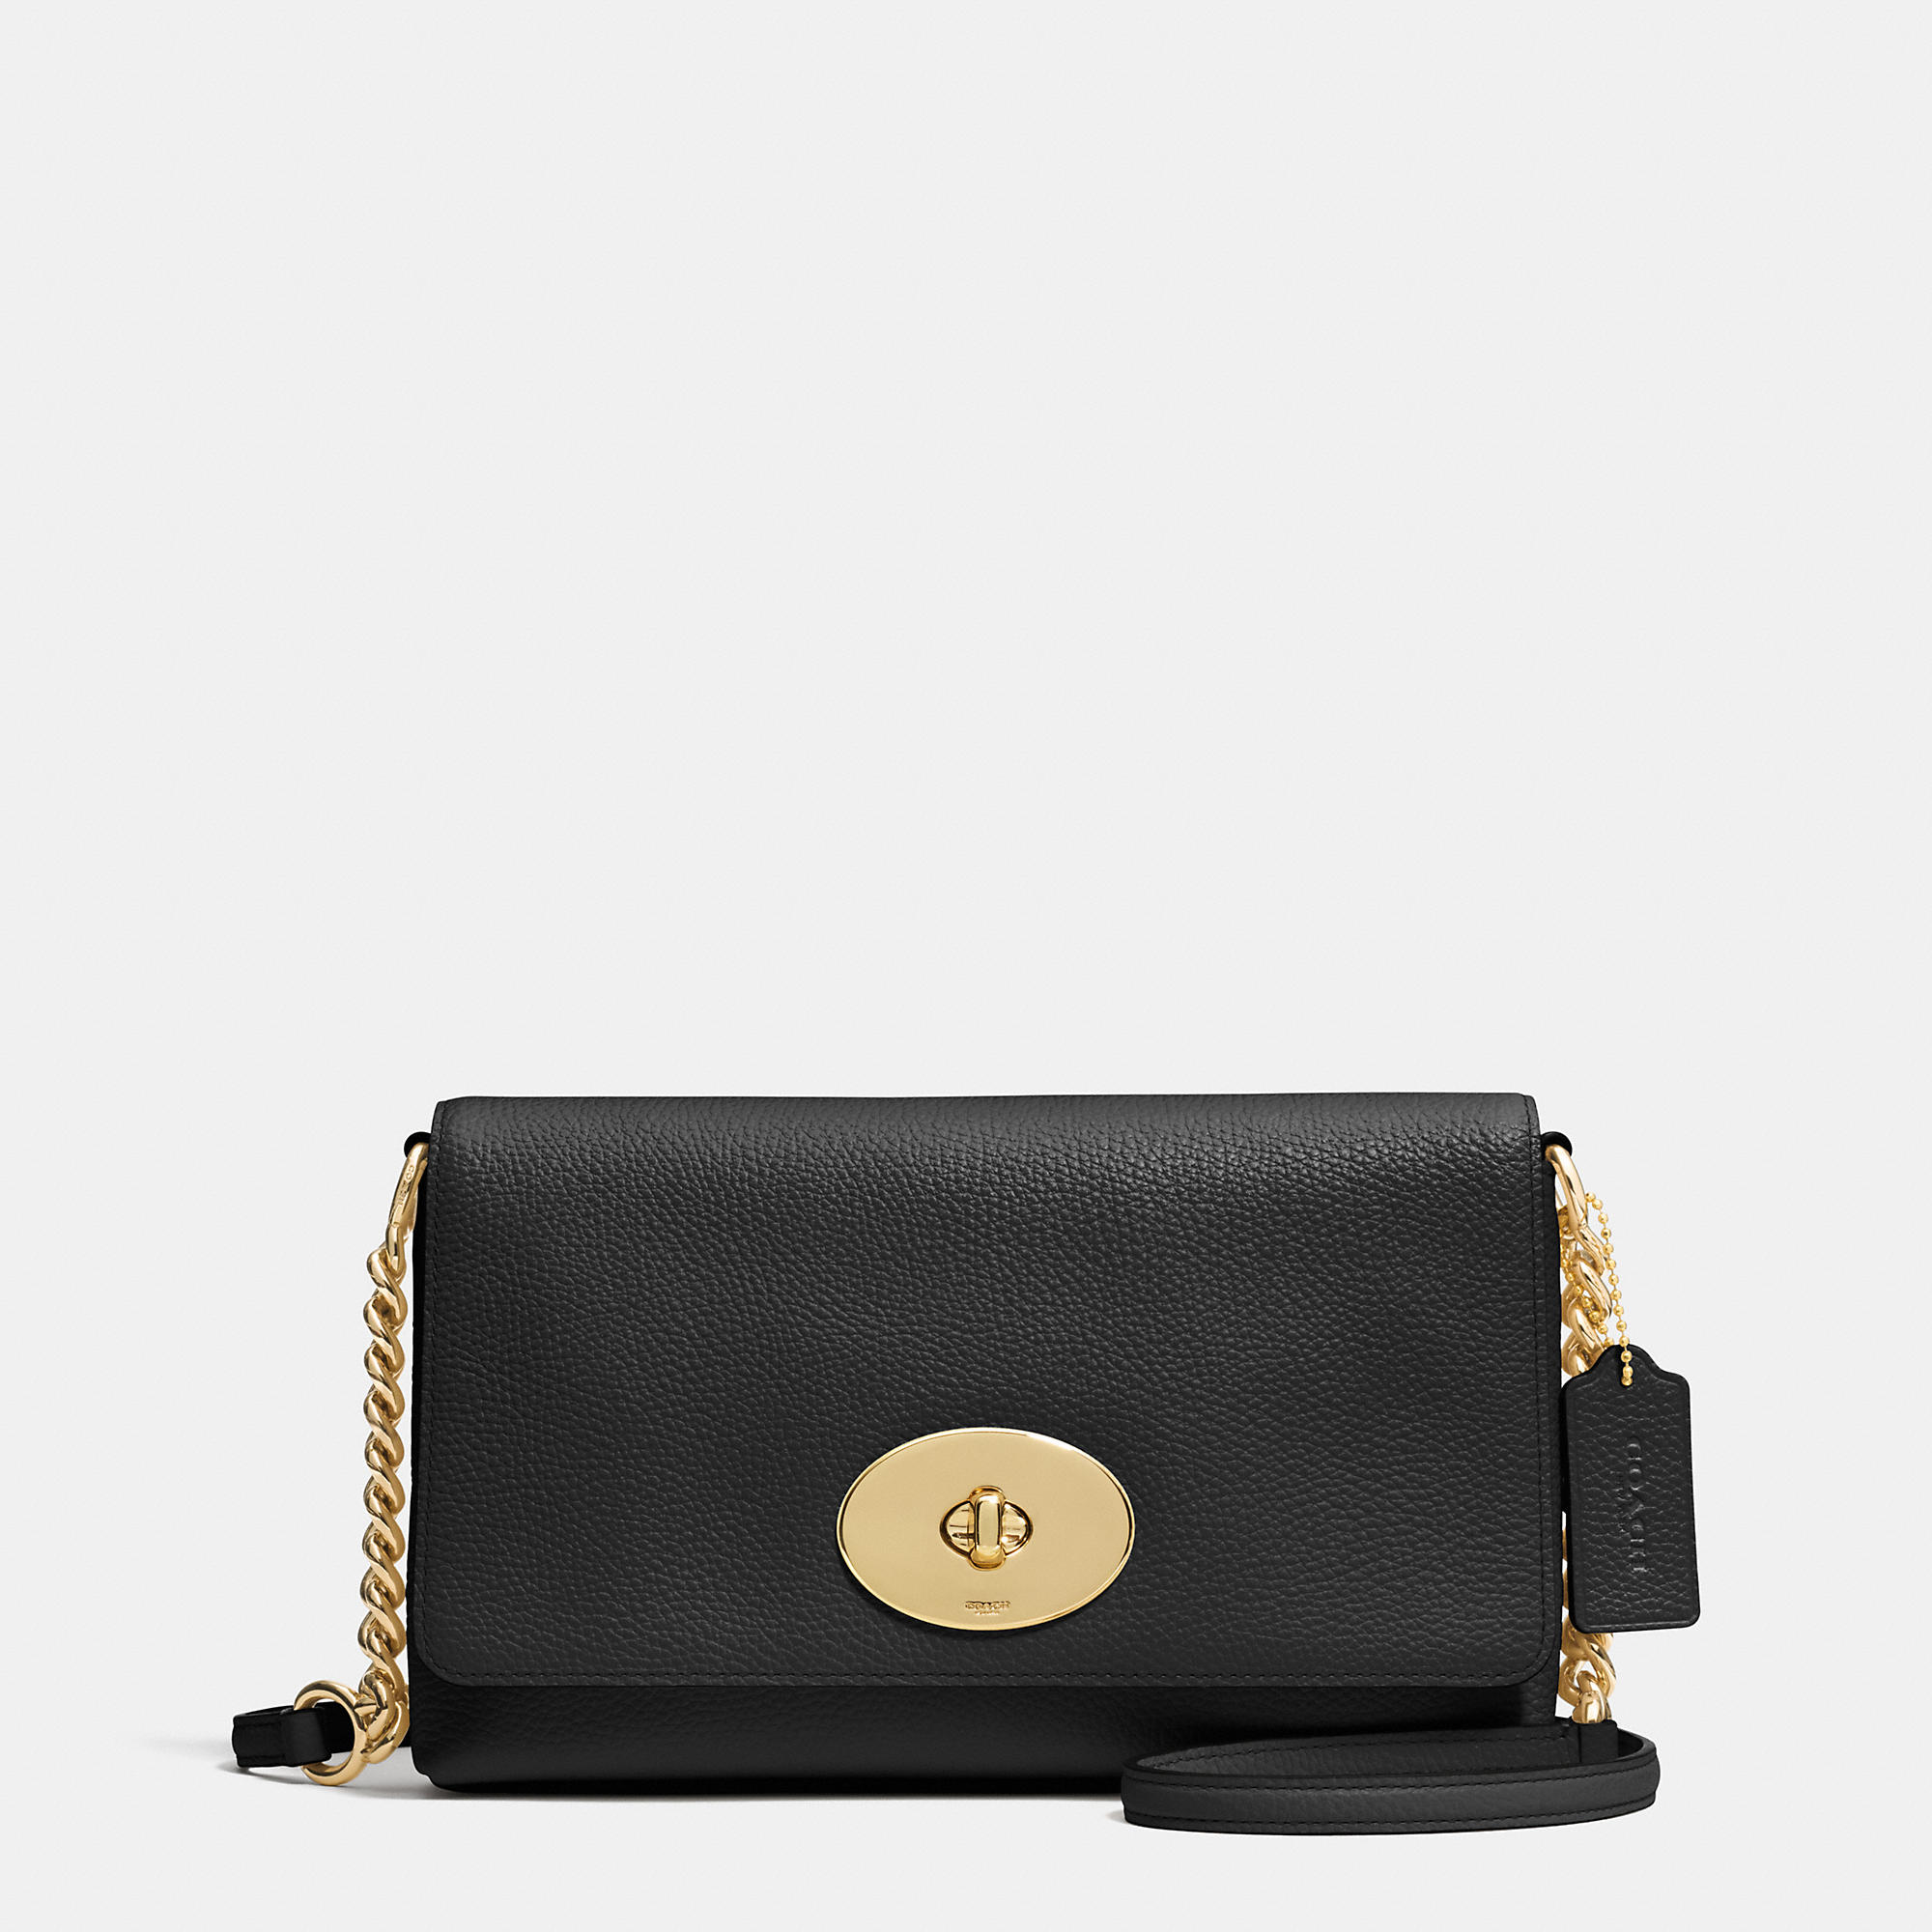 Famous Brand Coach Crosstown Crossbody In Pebble Leather